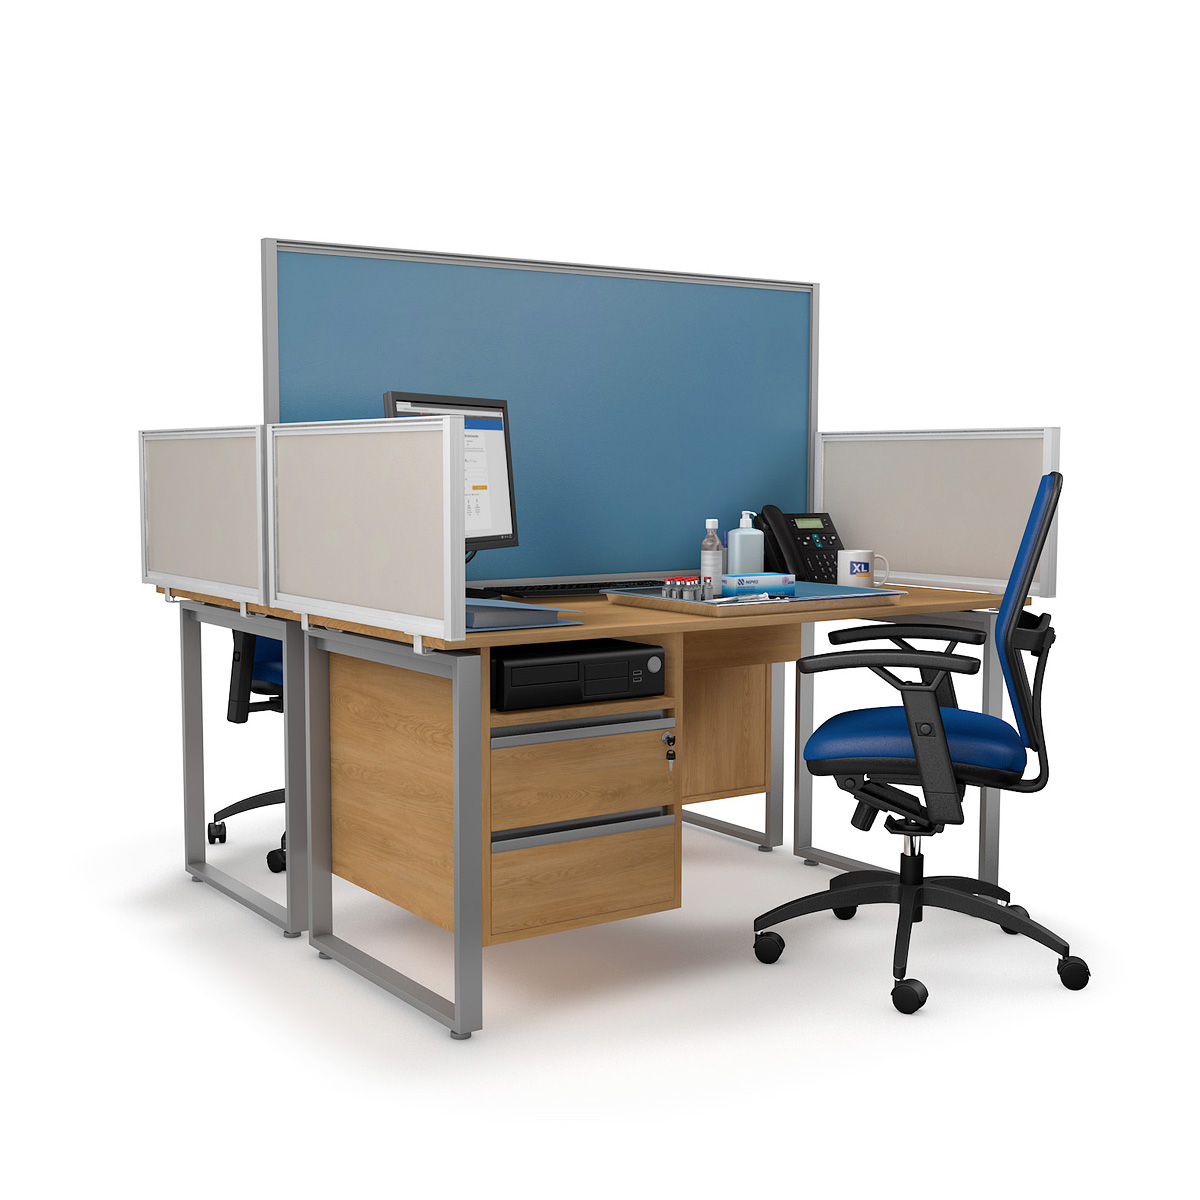 FRONTIER® Medical Screens Anti-Microbial Desk Dividers - Wipeable & Hygienic Screens For Hospitals & Medical Centers